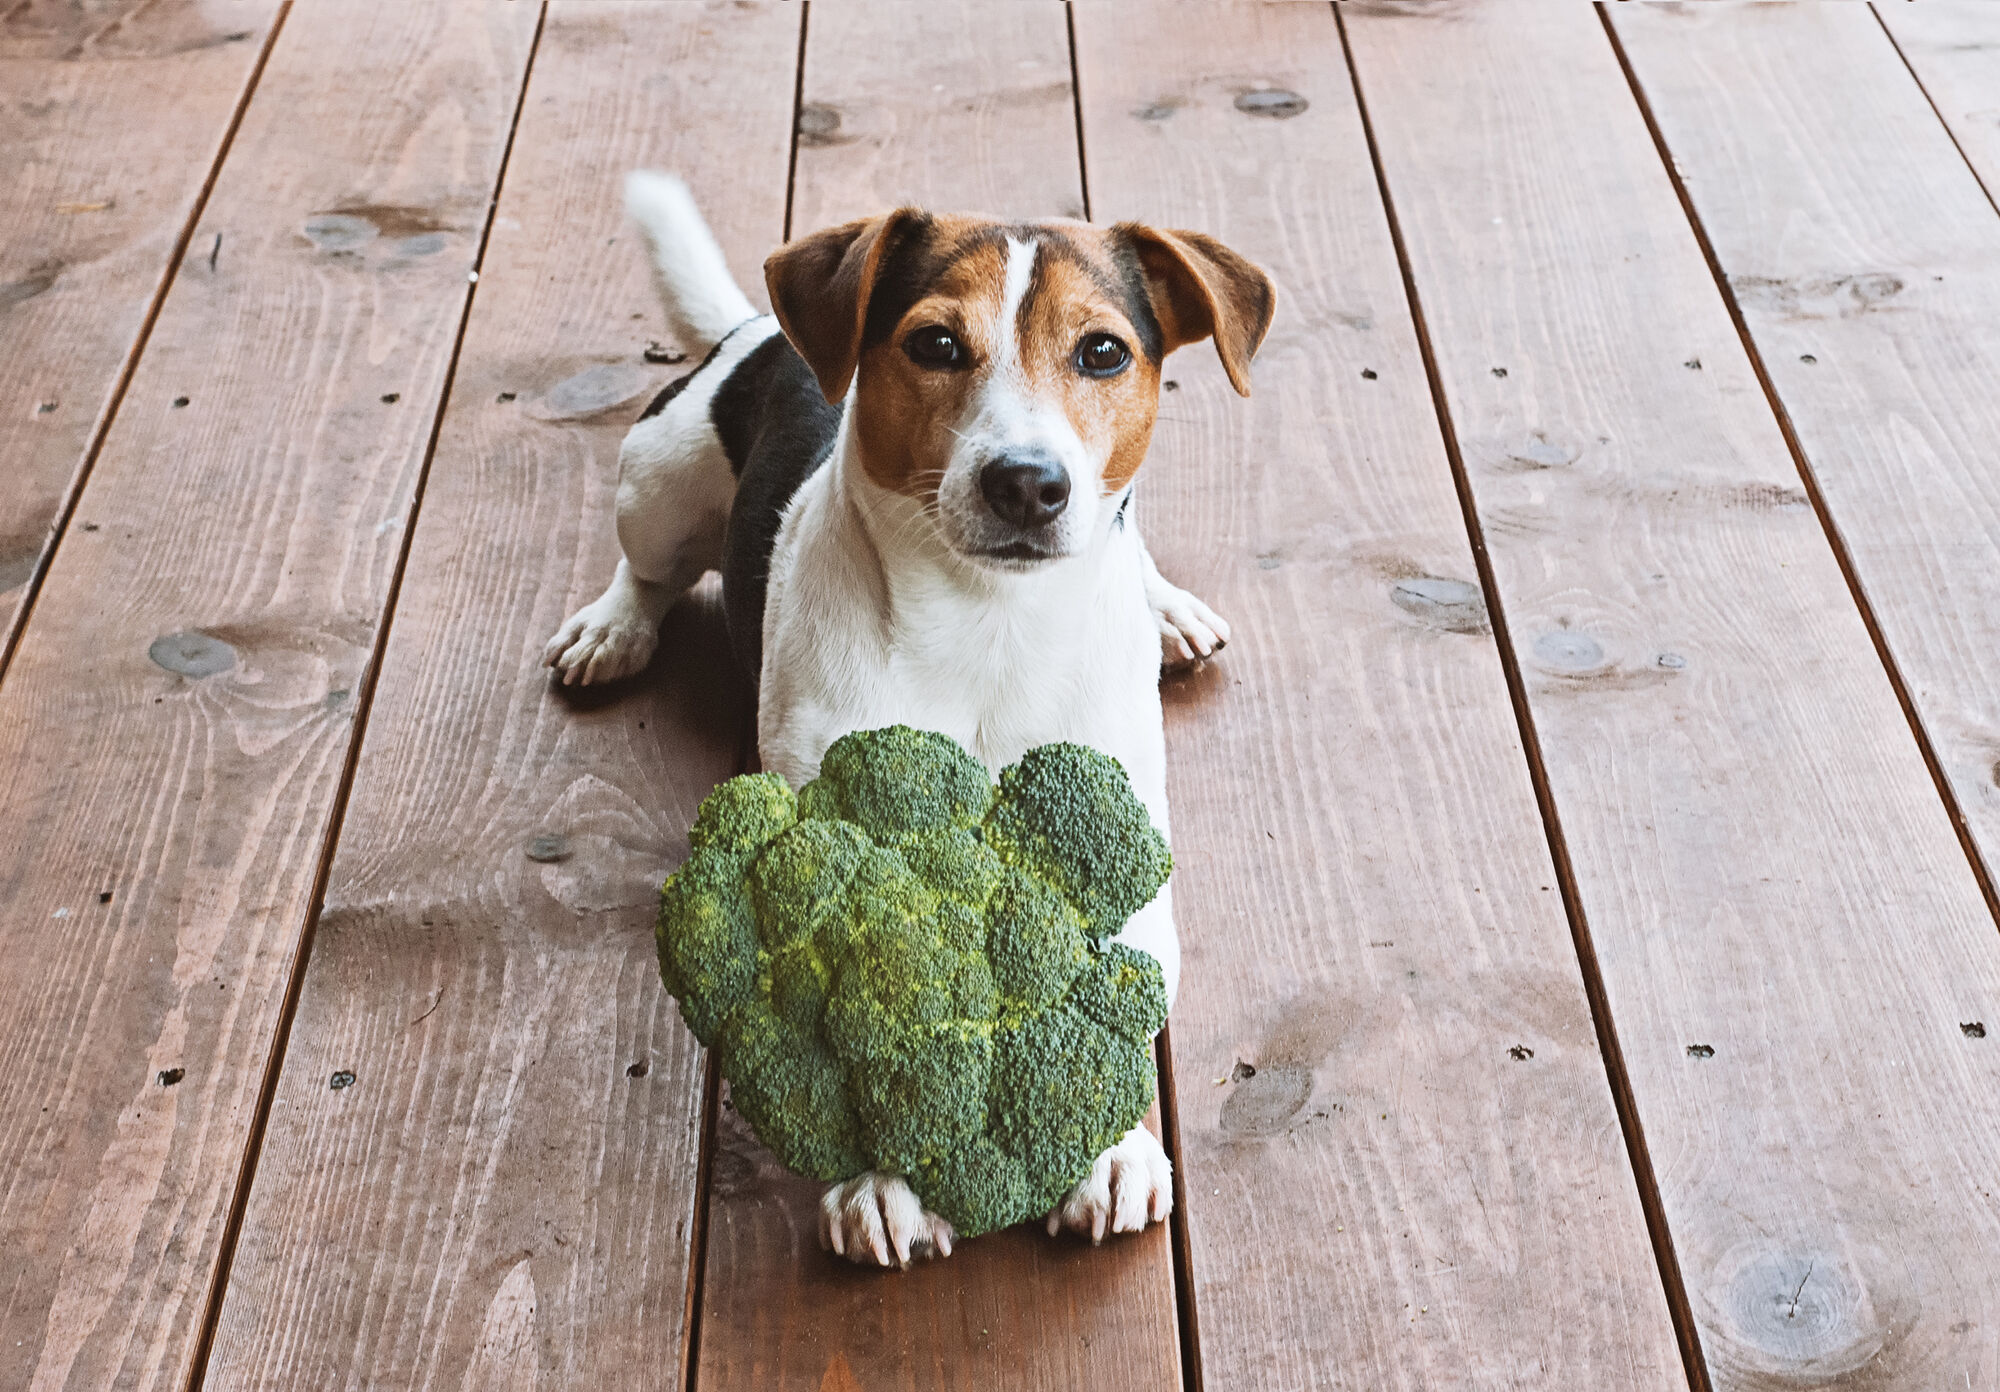 Jack Russell dog sitting calmly with a large crown of broccoli in between his front feet.